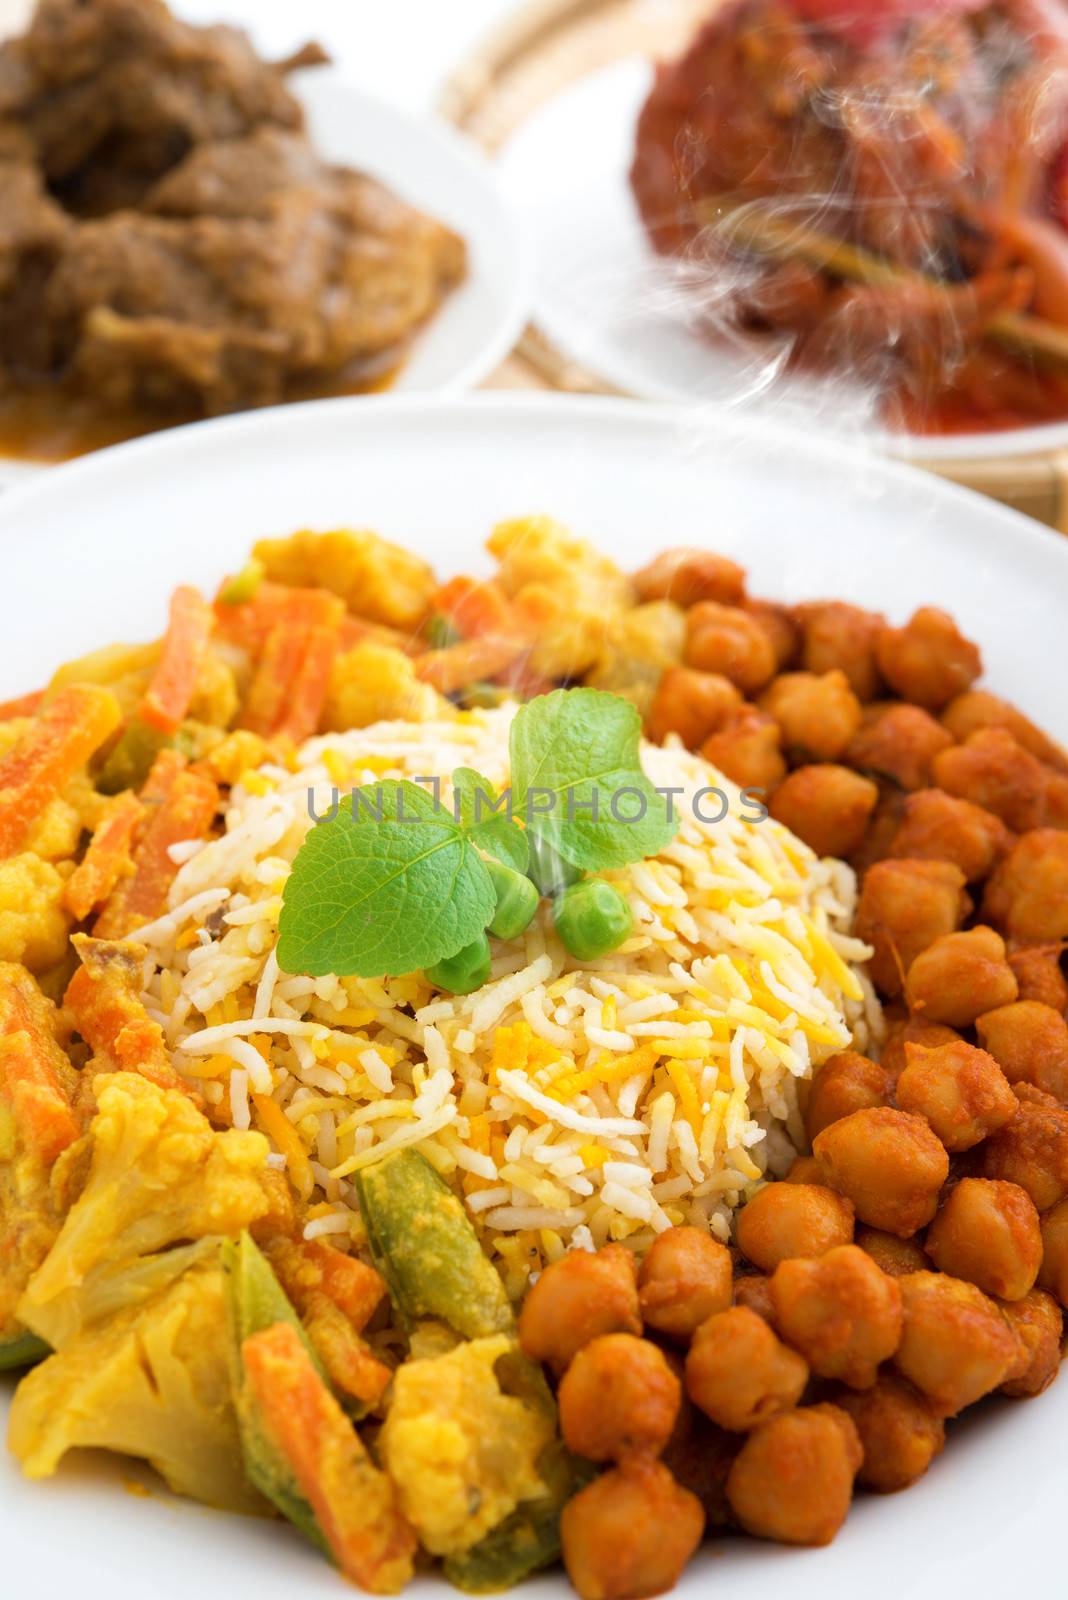 Biryani rice or briyani rice, fresh cooked with steam, delicious indian meal.